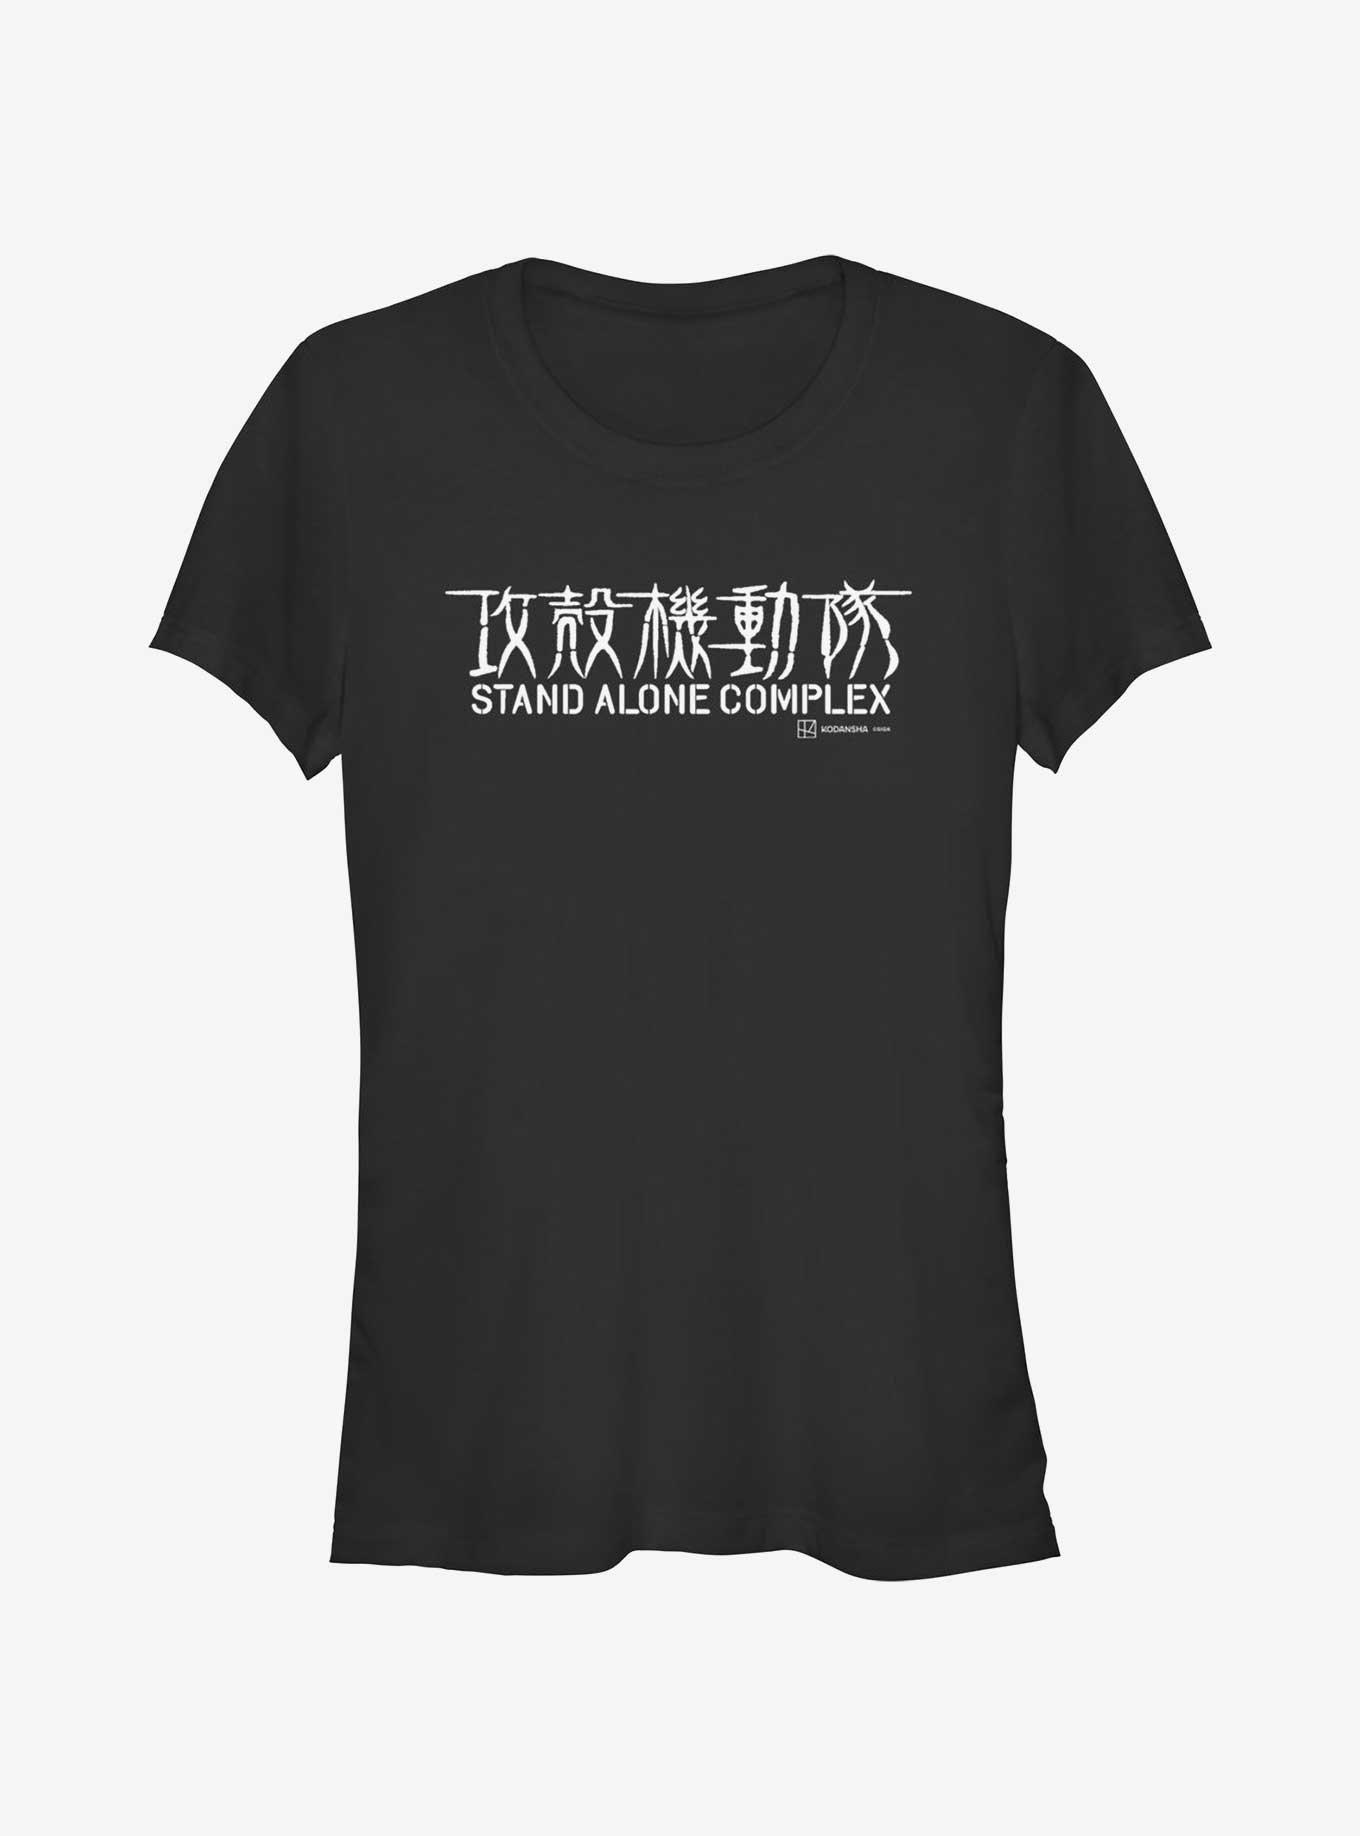 Ghost in the Shell Stand Alone Complex Logo Girls T-Shirt, BLACK, hi-res